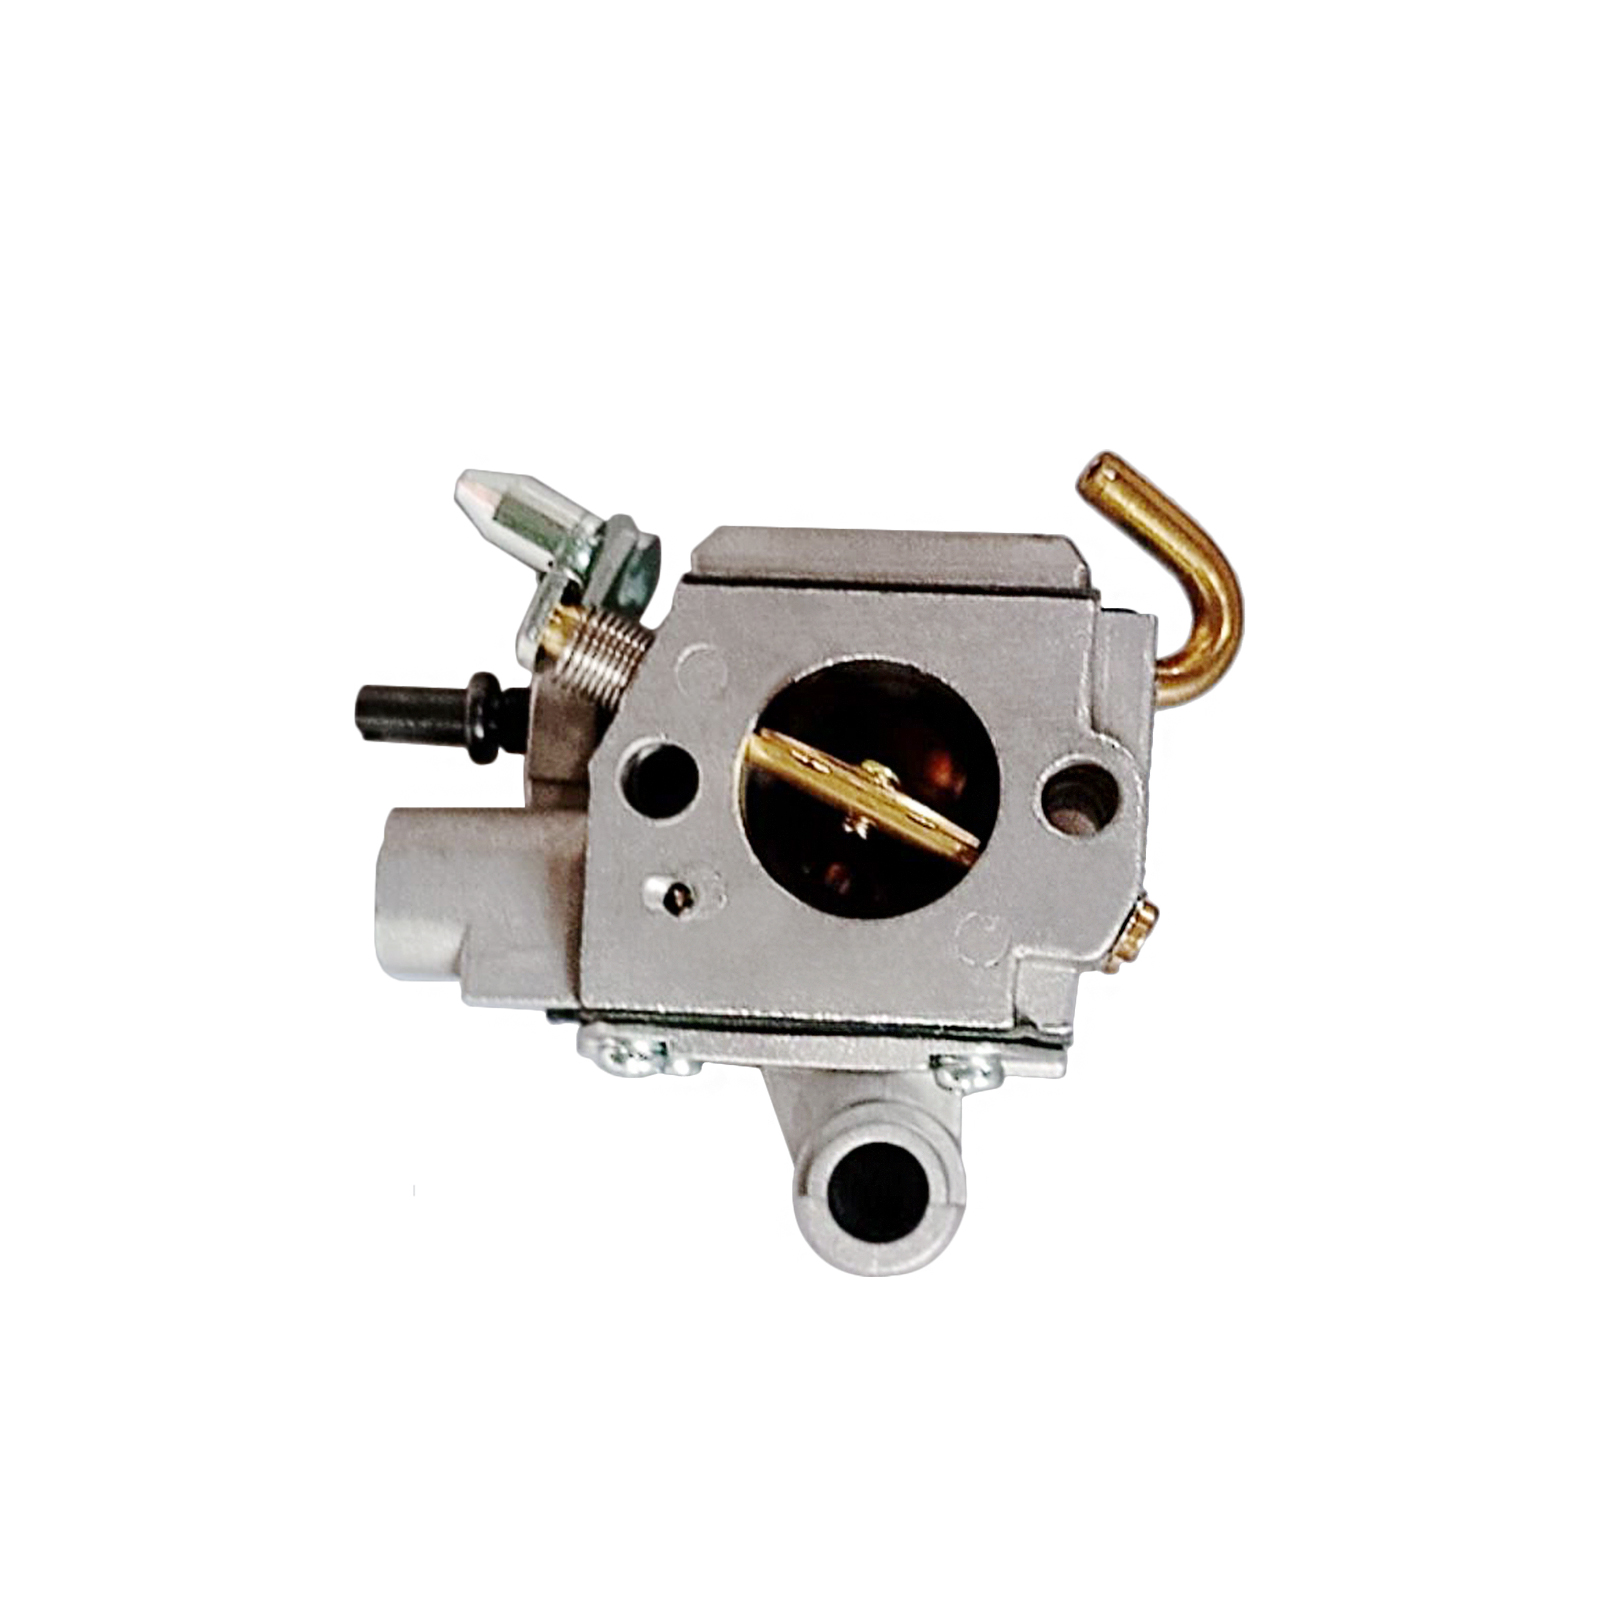 Carburetor For Stihl MS270 MS270C MS280 MS280C Chainsaw Replaces OEM HD-33, 1133 120 0607